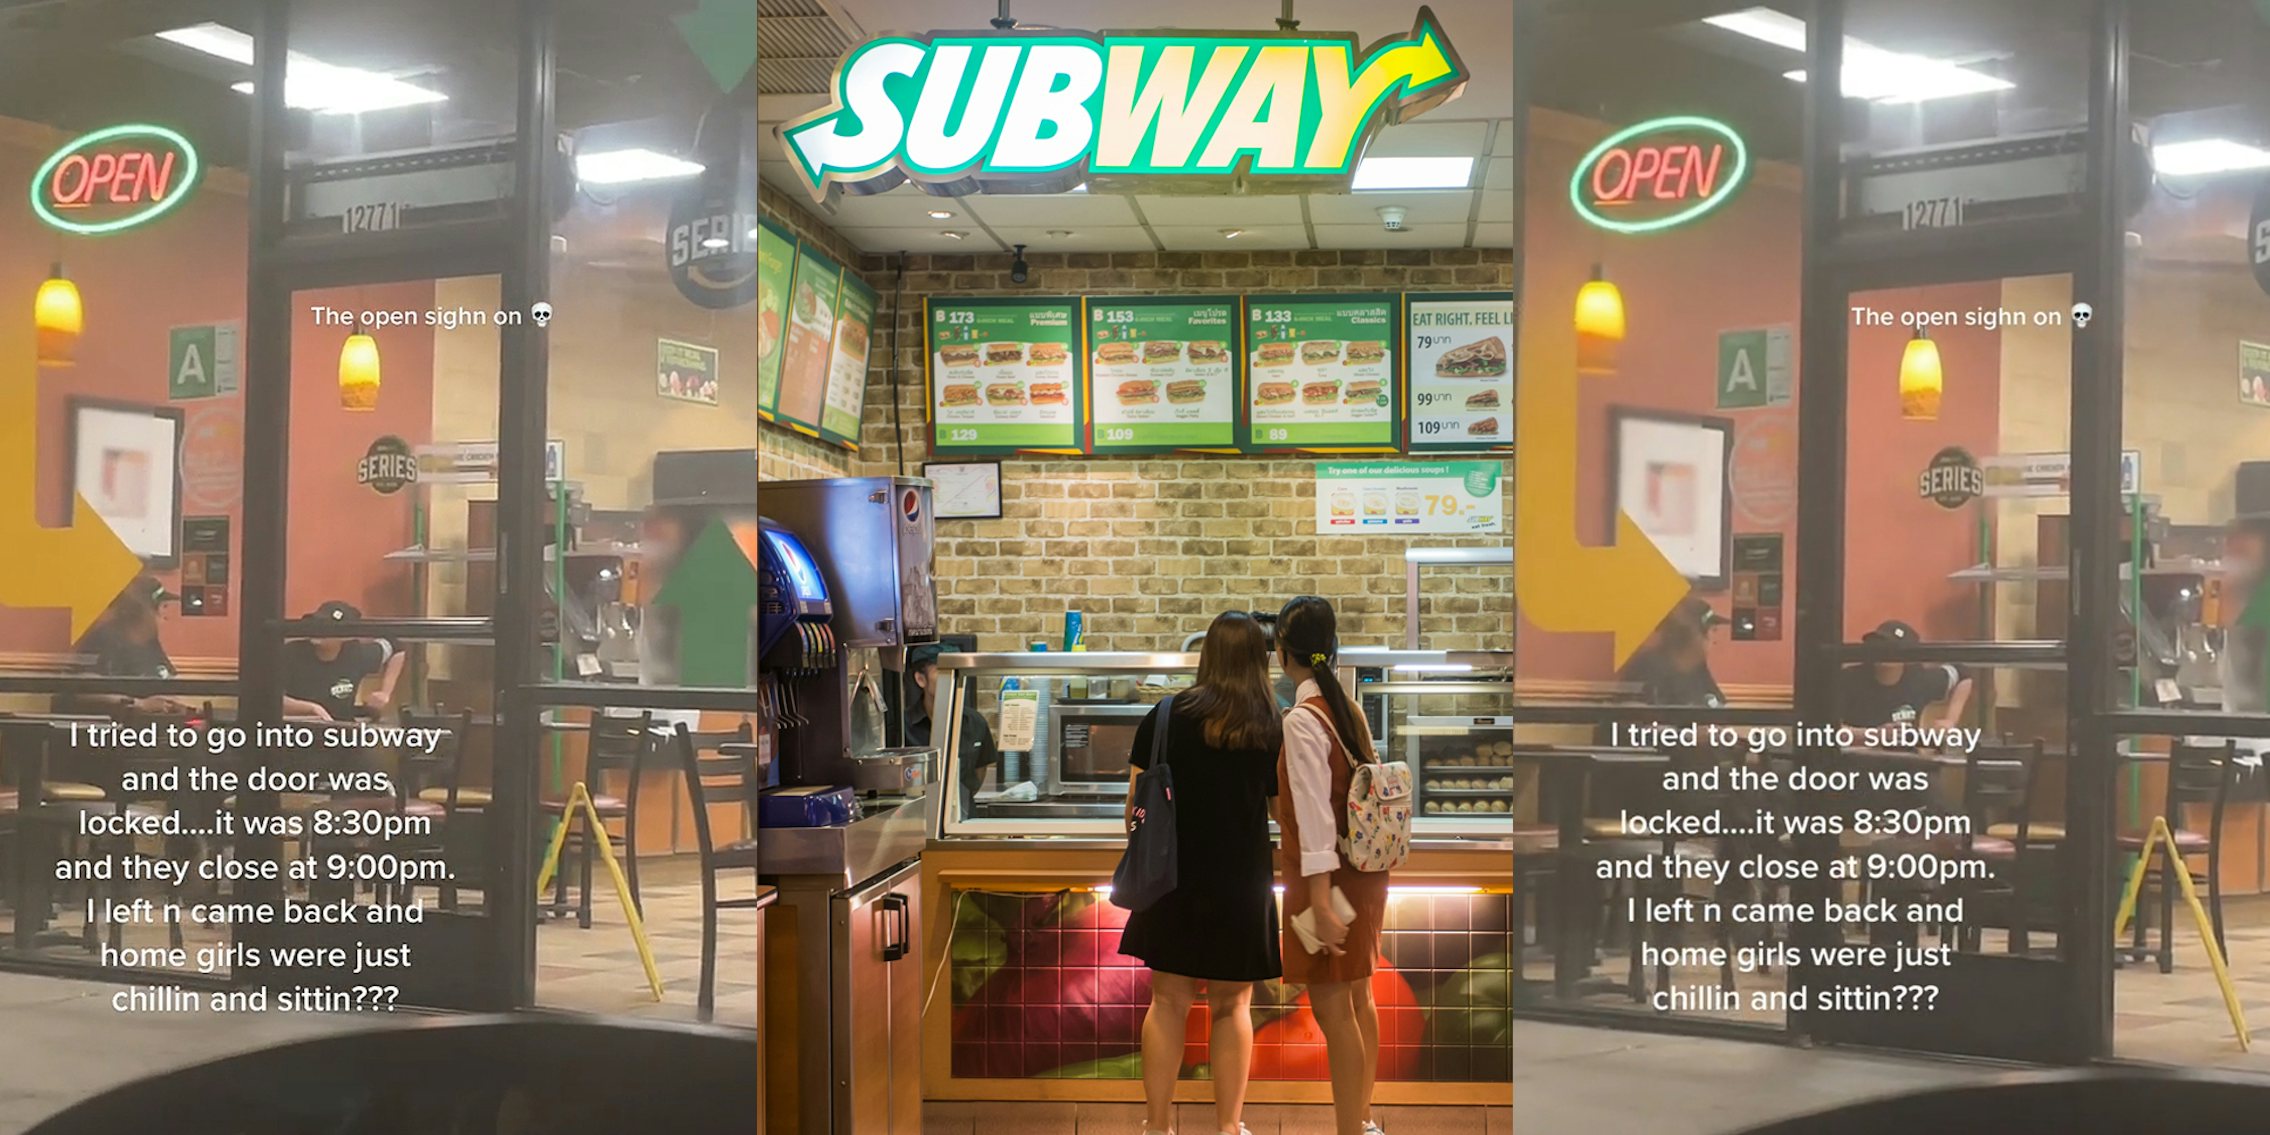 Subway exterior with workers seen sitting at table through glass caption 'The open sighn' 'I tried to get into Subway and the door was locked... it was 8:30pm and they close at 9:00pm. I left n came back and home girls were just chillin and sittin???' (l) Subway interior with customers picking order (c) Subway exterior with workers seen sitting at table through glass caption 'The open sighn' 'I tried to get into Subway and the door was locked... it was 8:30pm and they close at 9:00pm. I left n came back and home girls were just chillin and sittin???' (r)